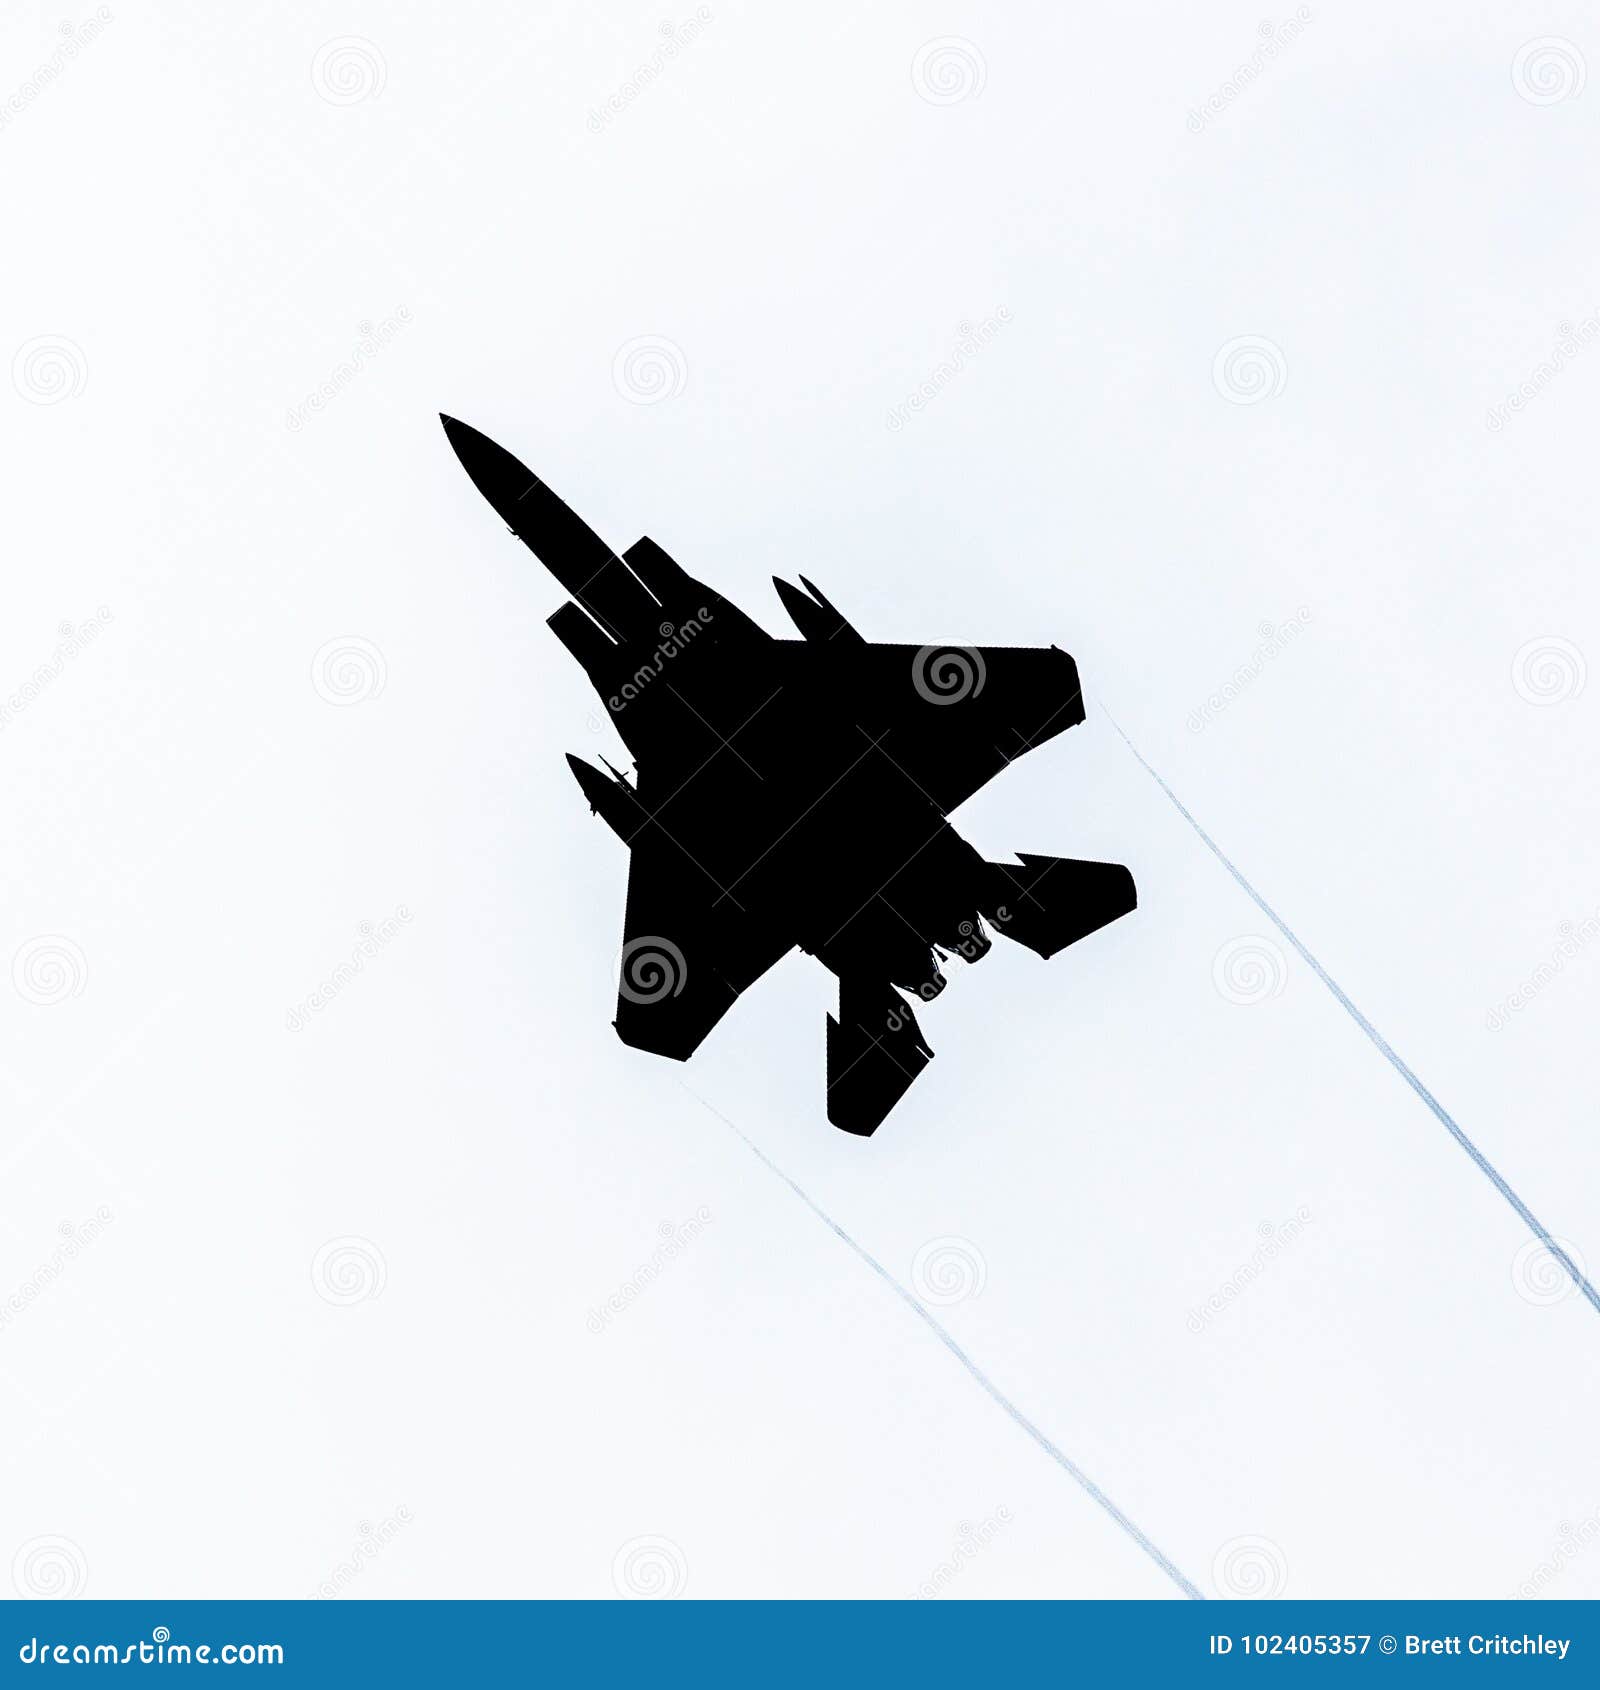 F15 Strike Eagle Fighter Jet Silhouette Stock Image - Image of mission, tra...